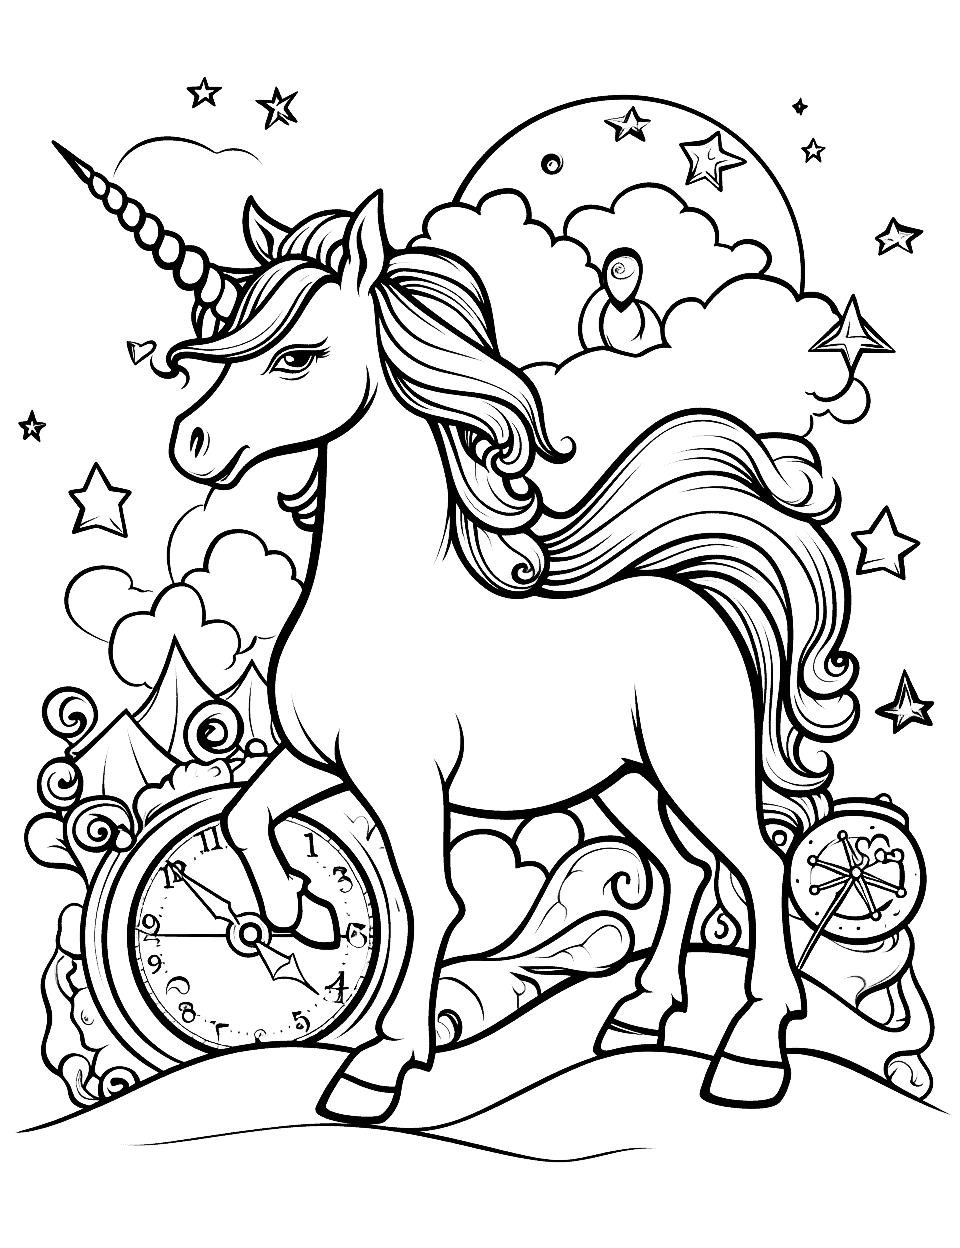 Unicorn With a Time Machine Coloring Page - A unicorn in a time machine, with clocks, gears, and a futuristic or past scenery appearing in the background.